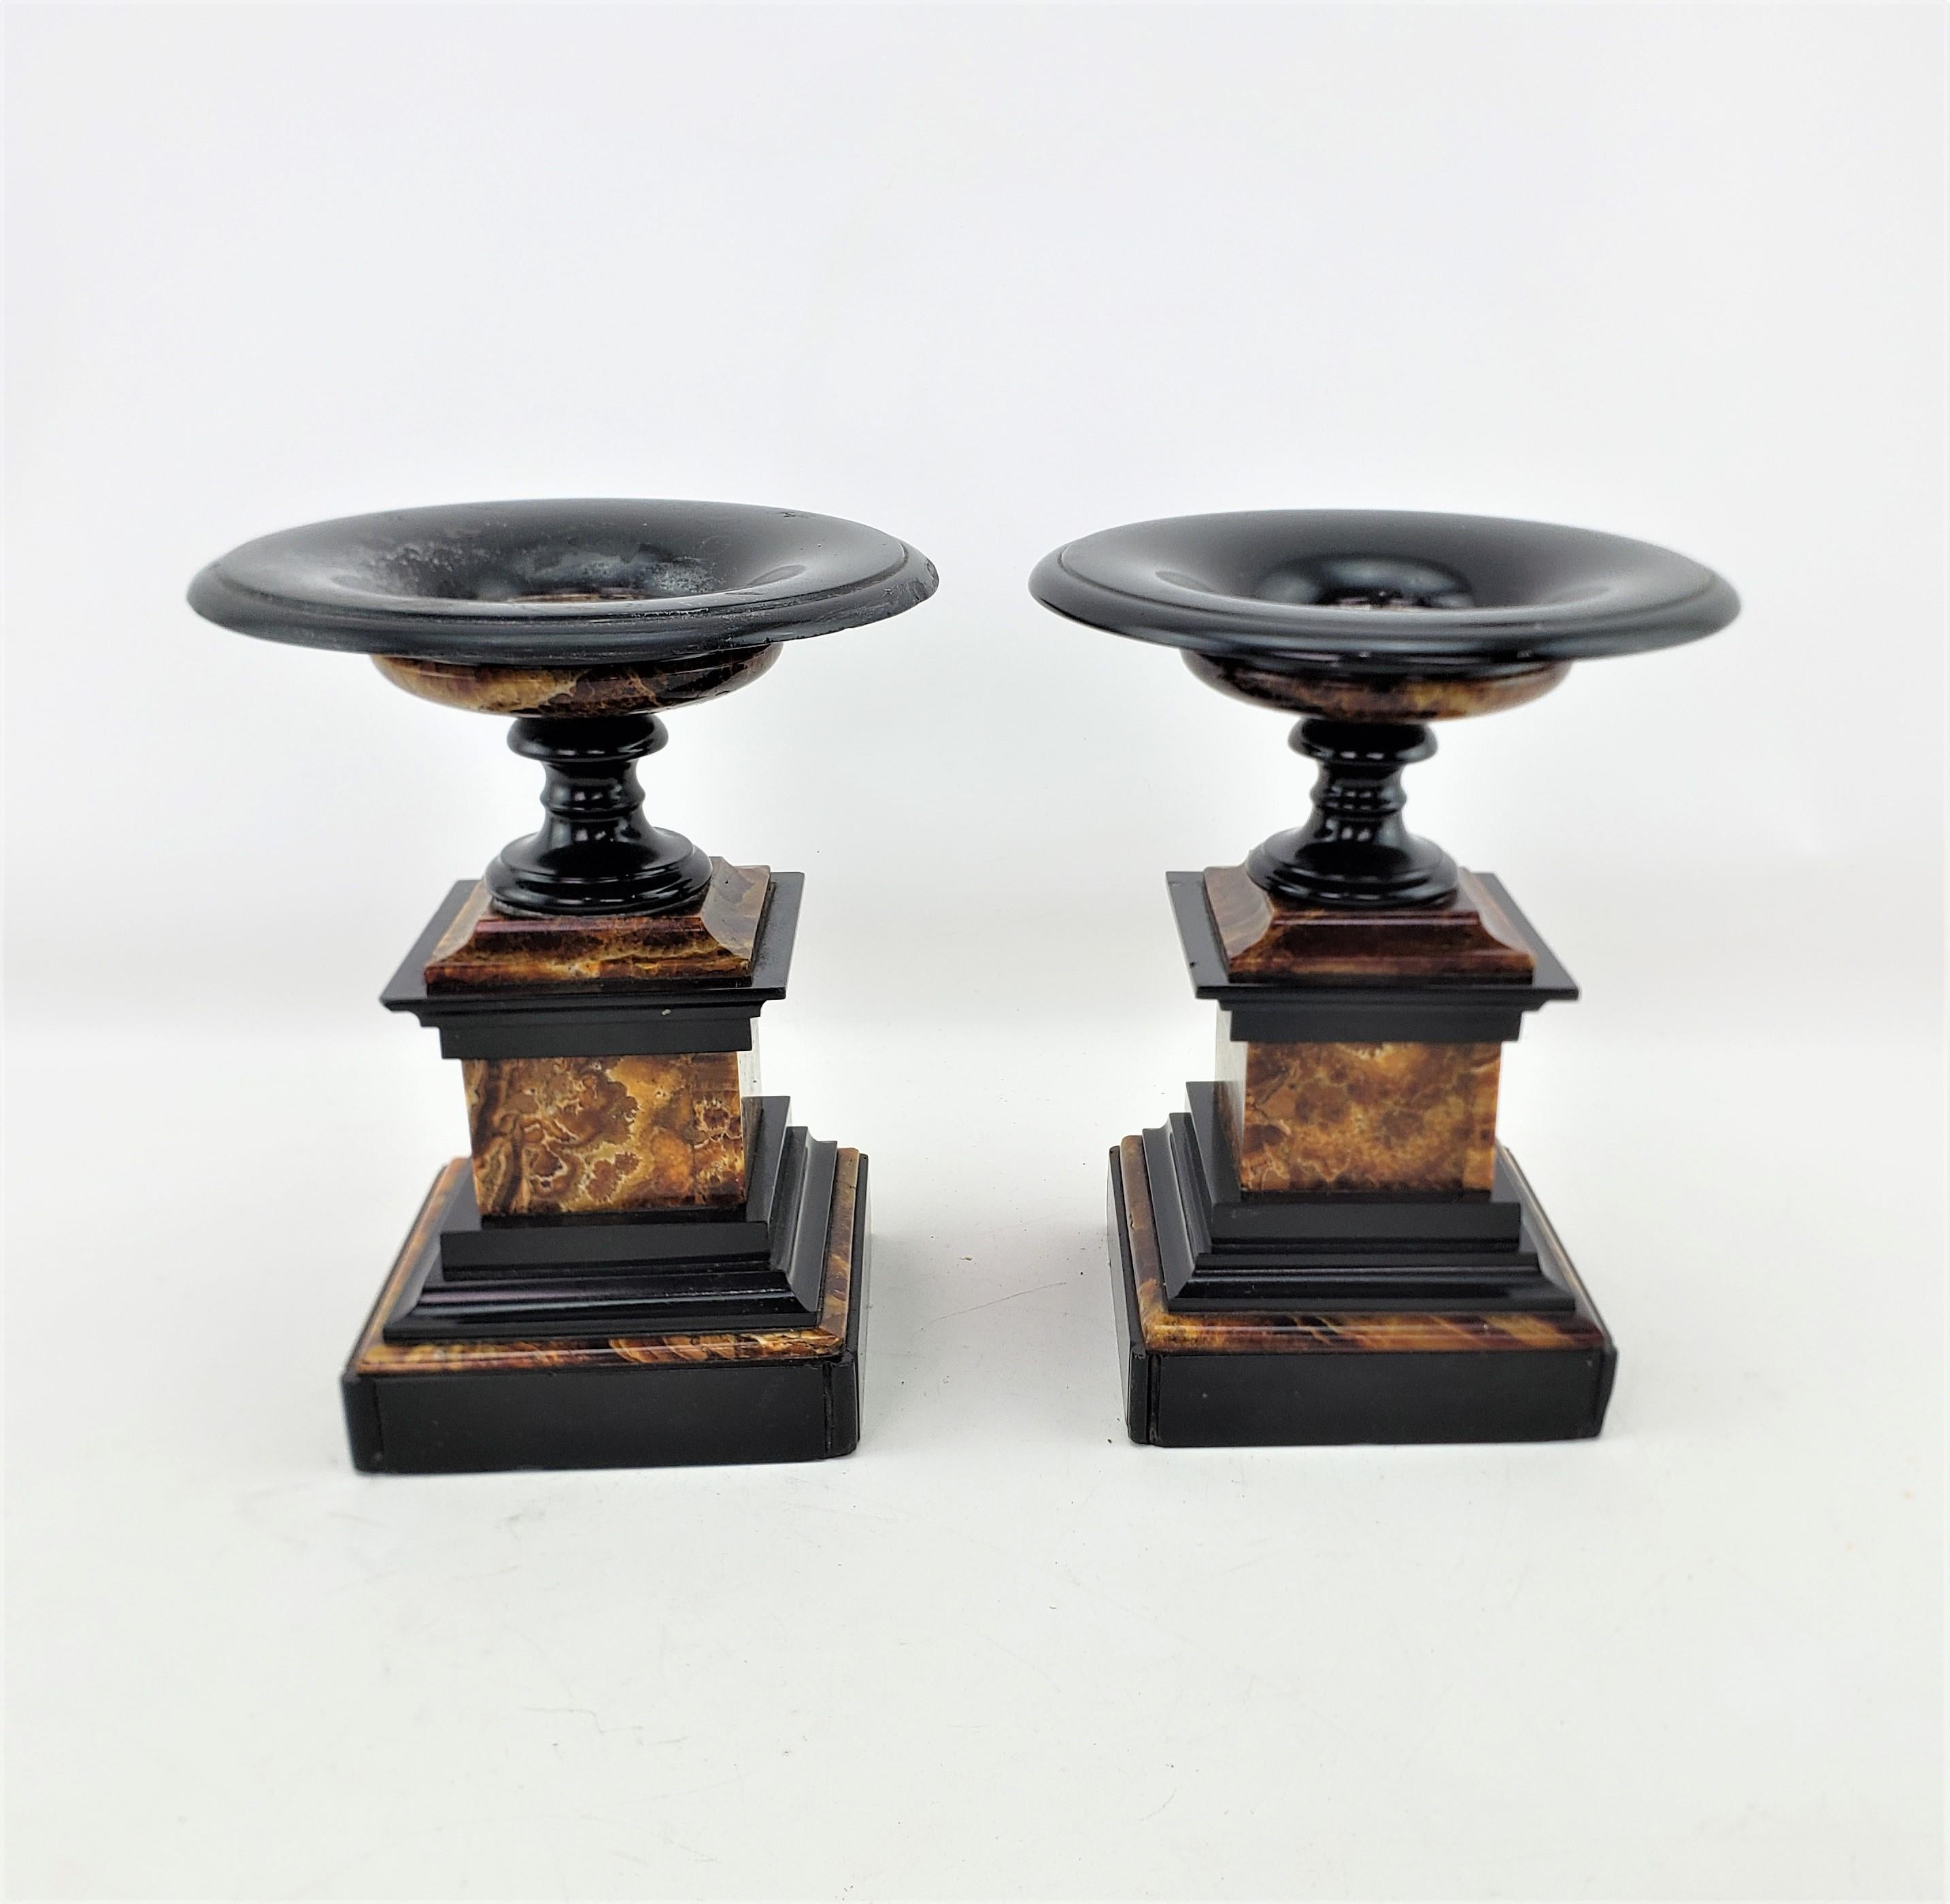 Art Deco Pair of Antique French Polished Slate & Marble Garniture Set or Tazzas For Sale